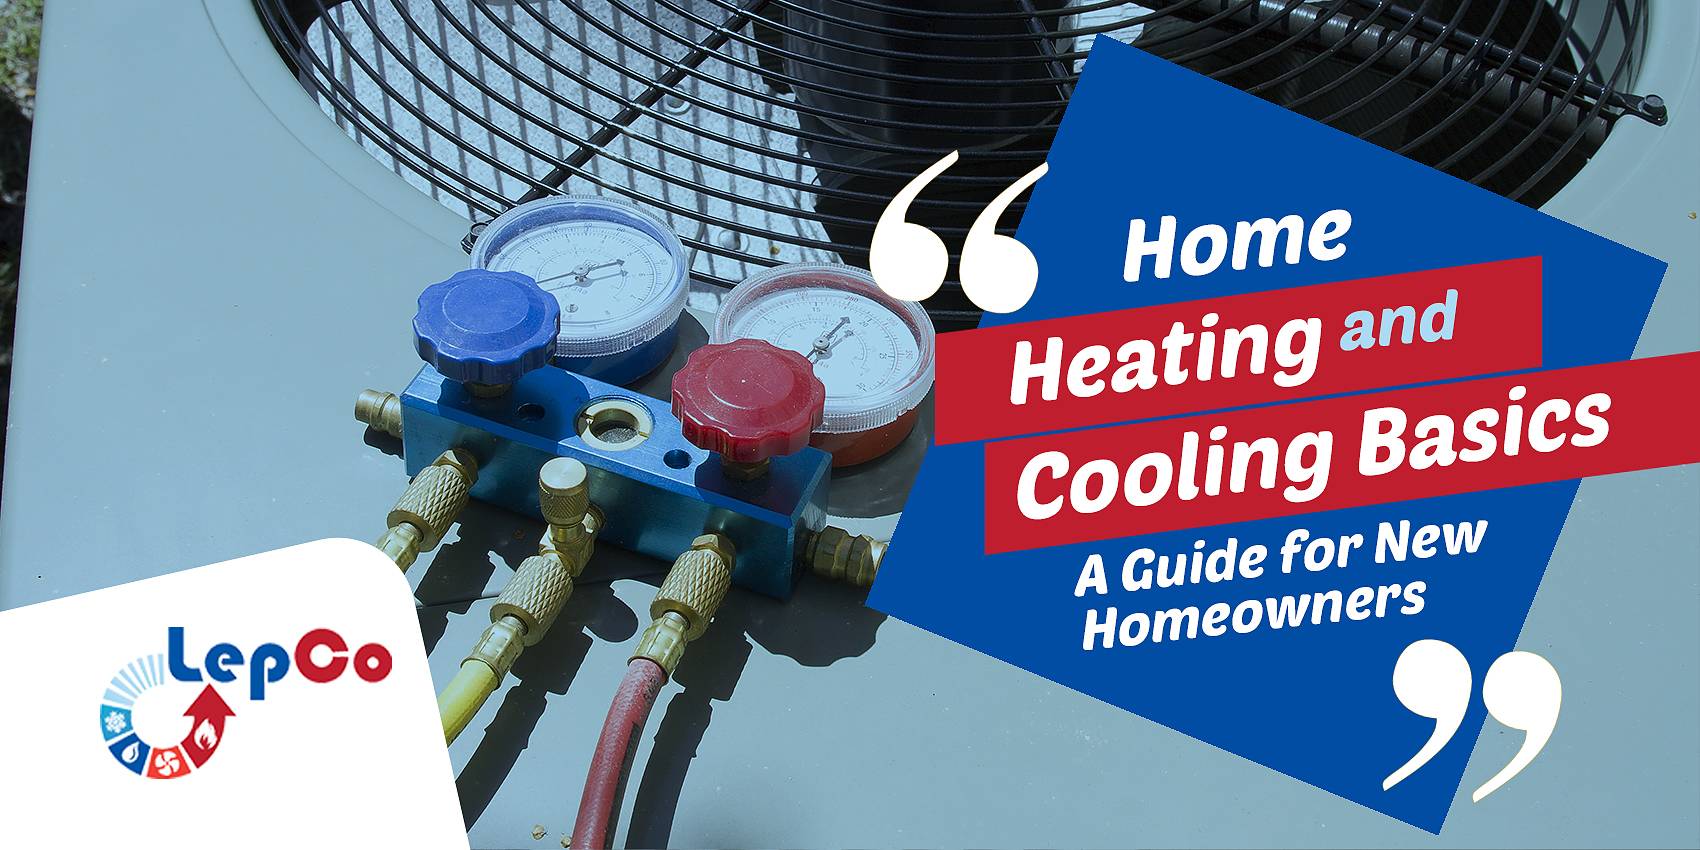 HVAC LepCp for your new home heating and cooling guide